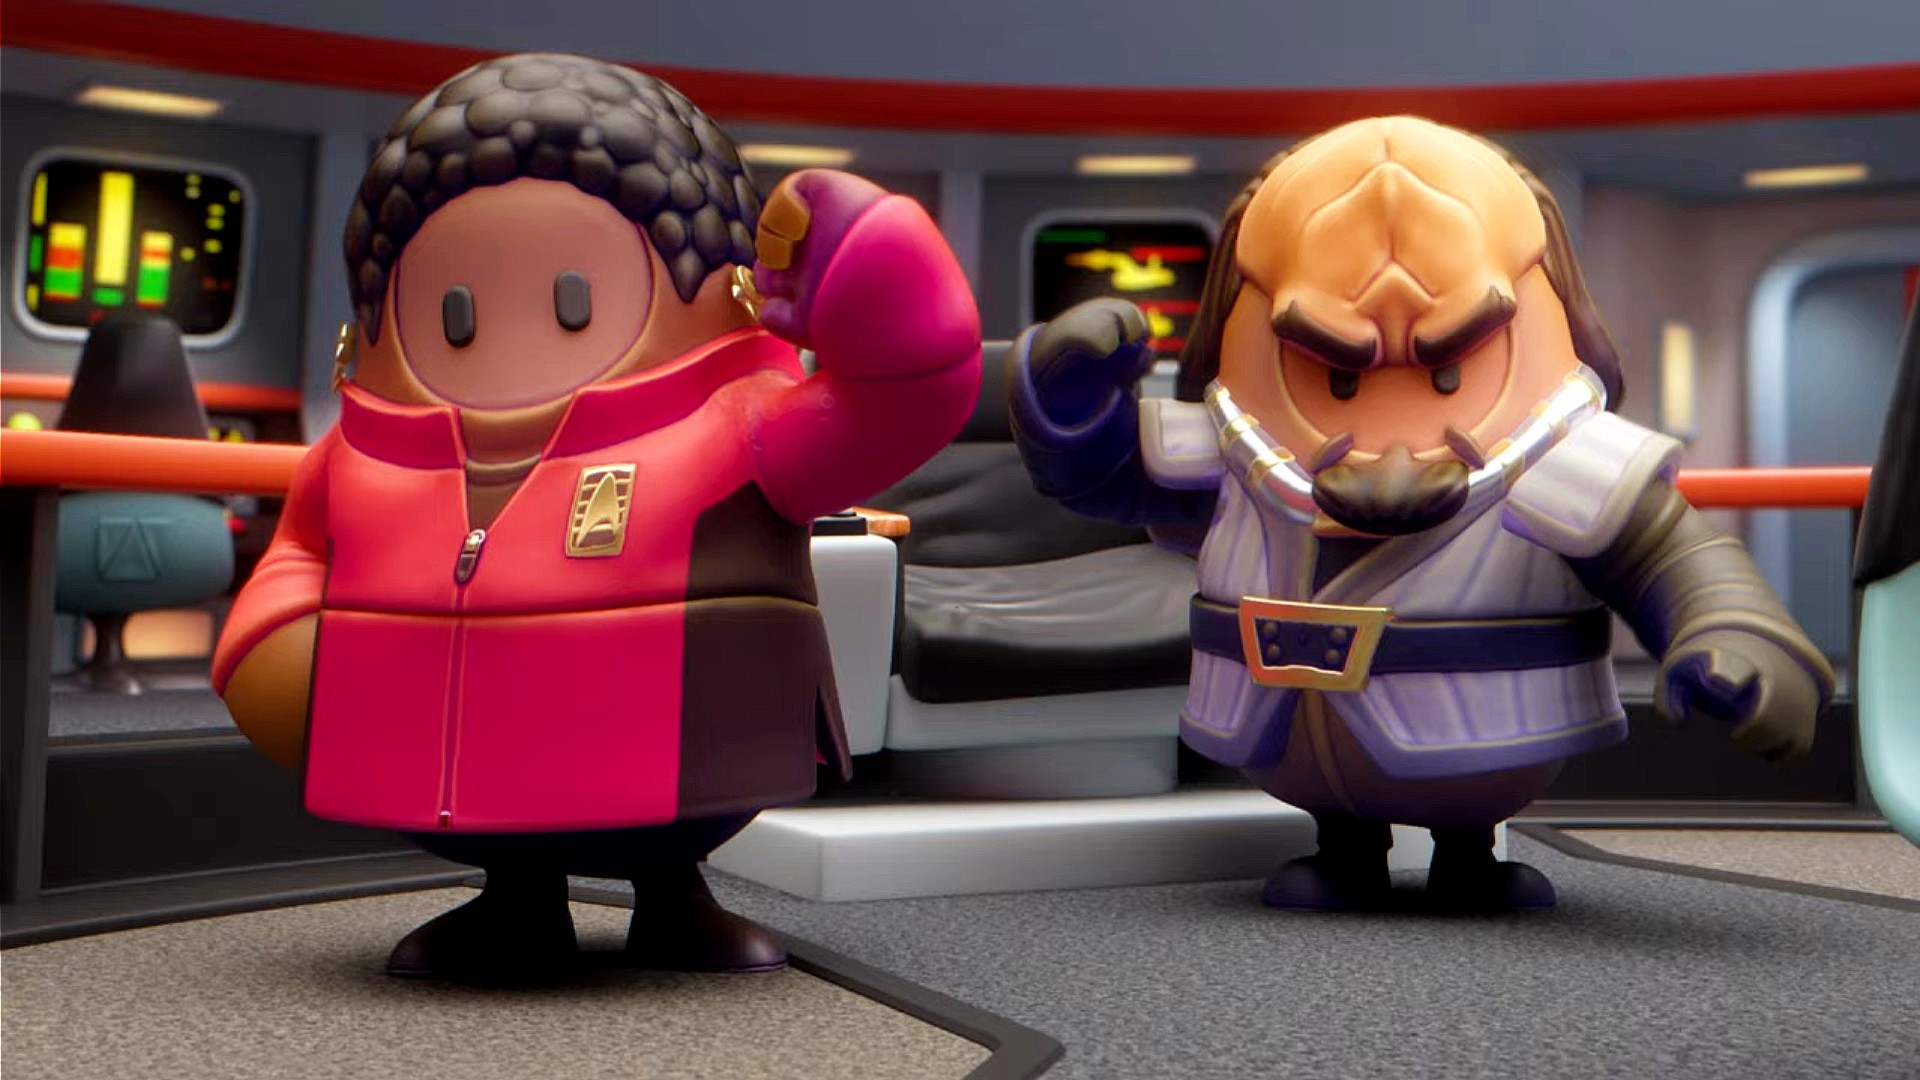 Fall Guys Star Trek crossover adds Worf, Uhura, and Spock beans